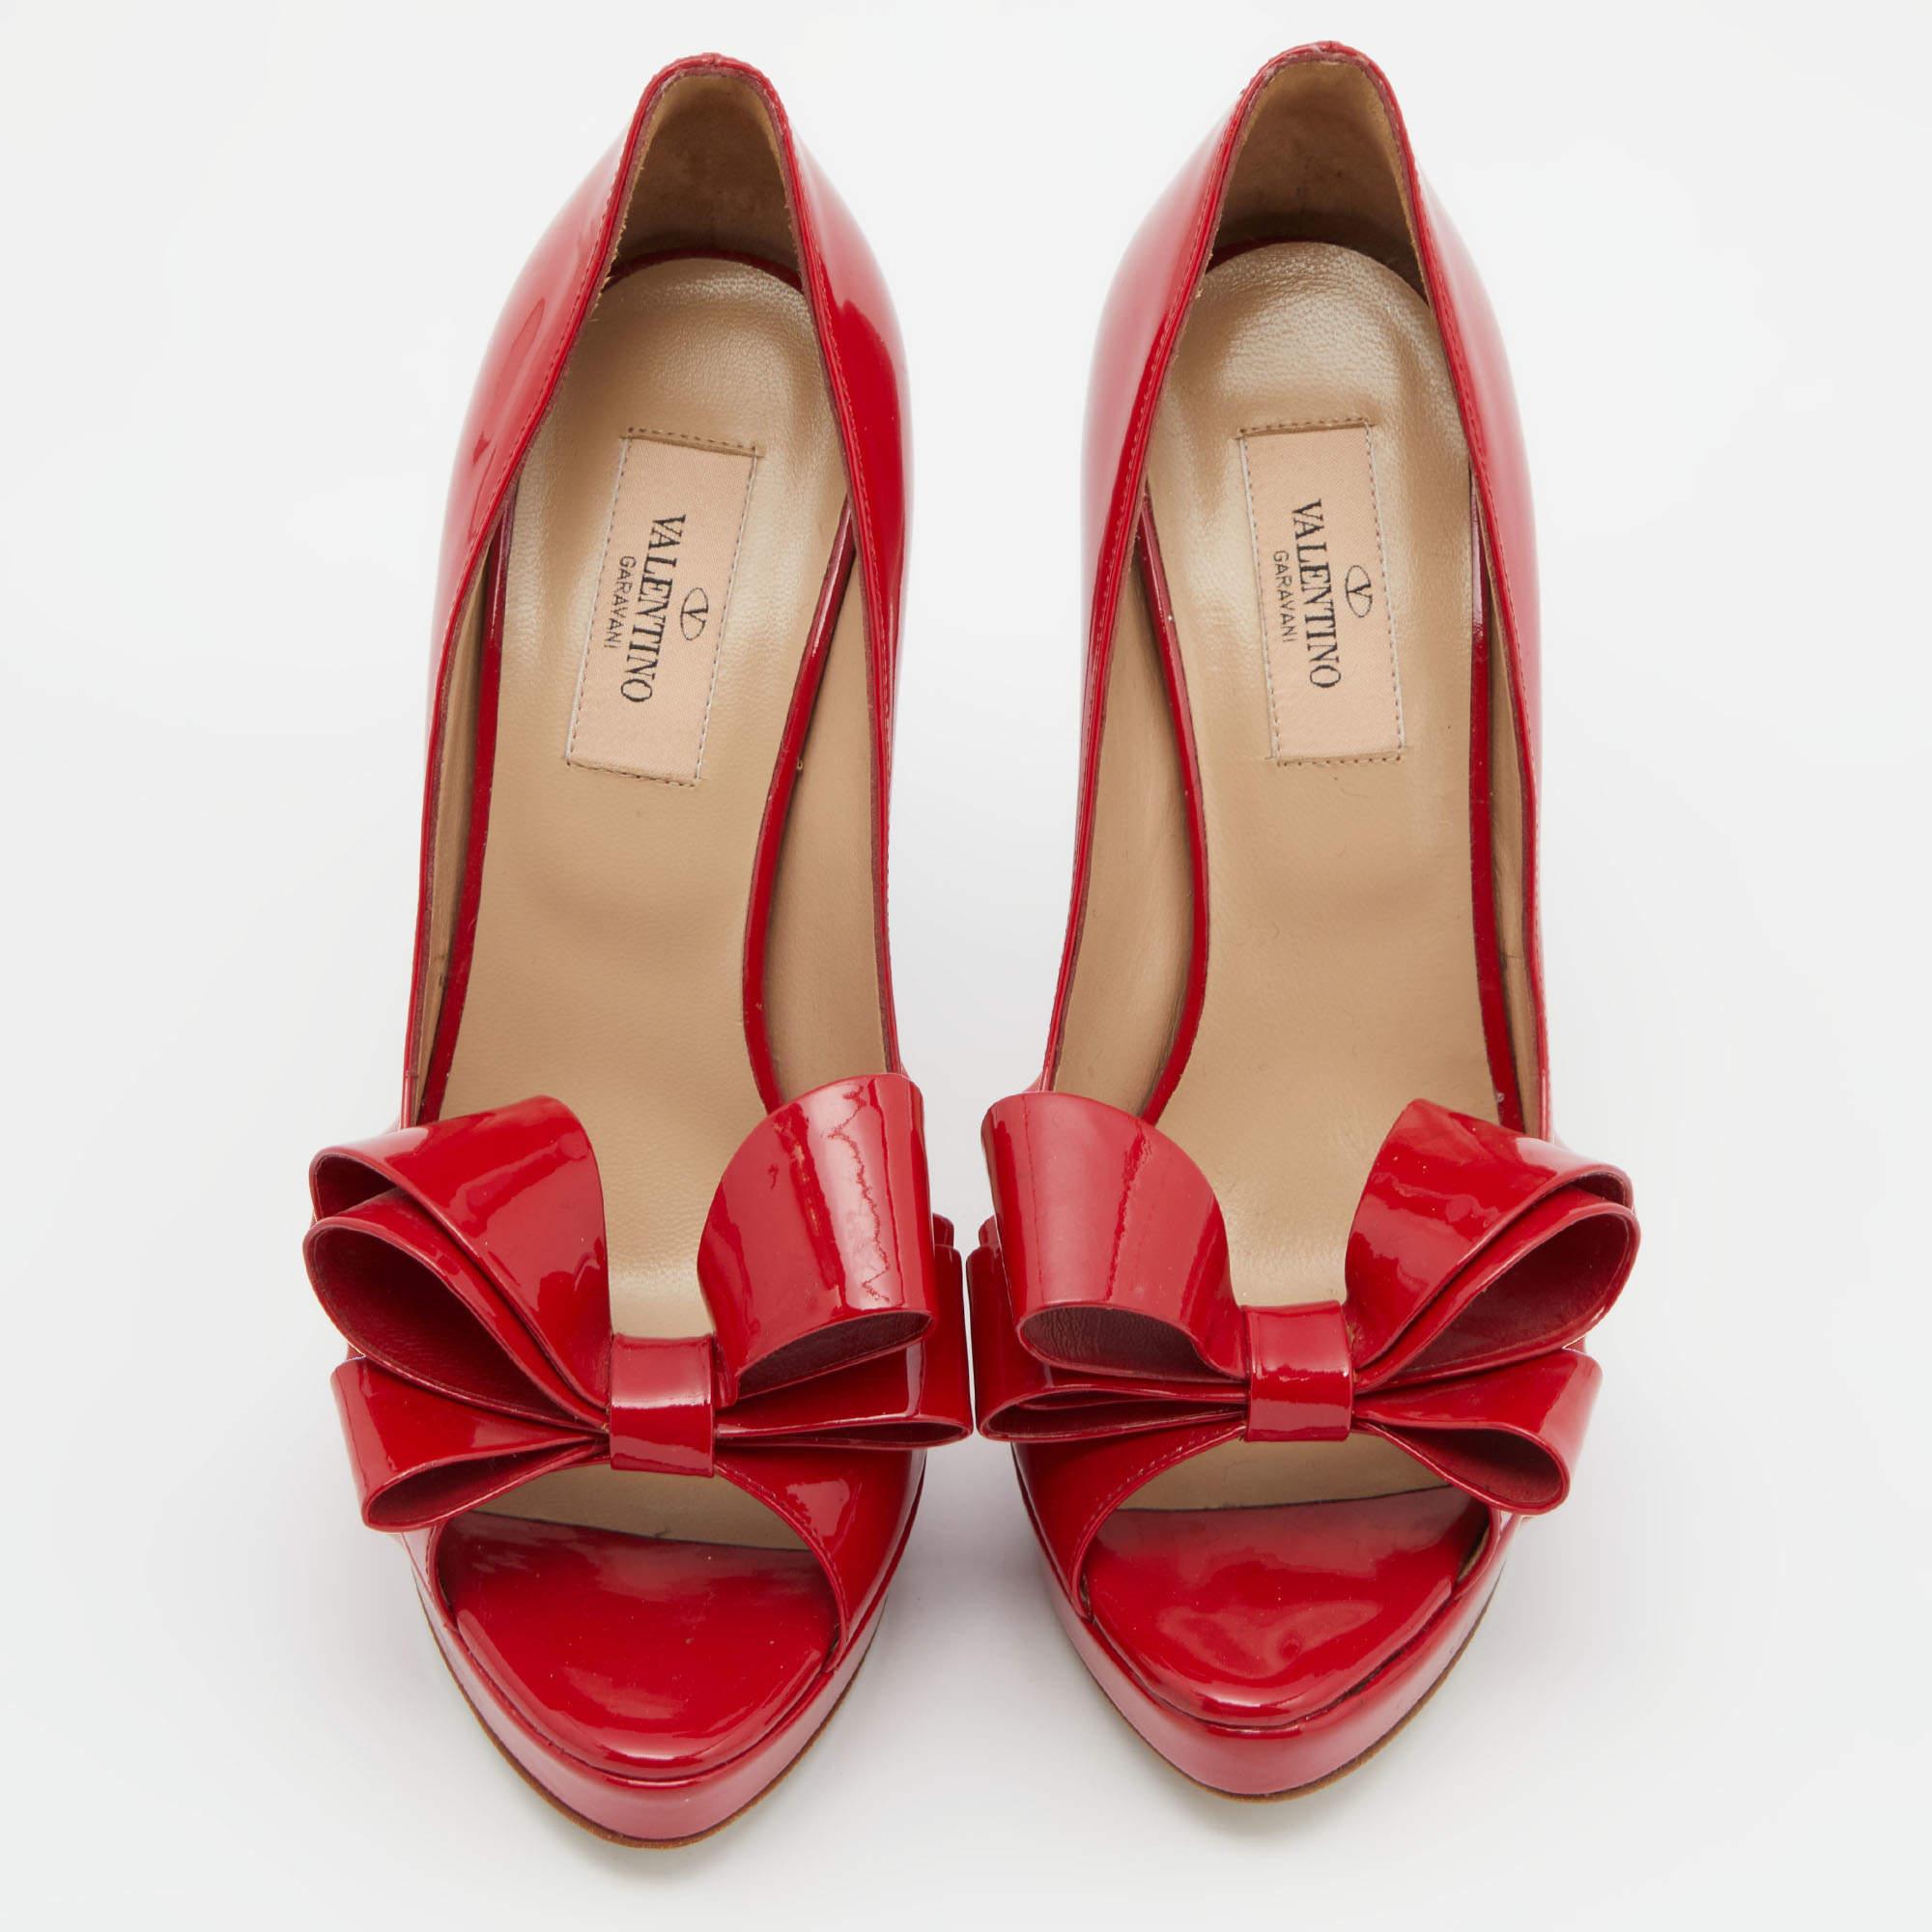 Valentino Red Patent Leather Bow Peep Toe Platform Pumps Size 38 2